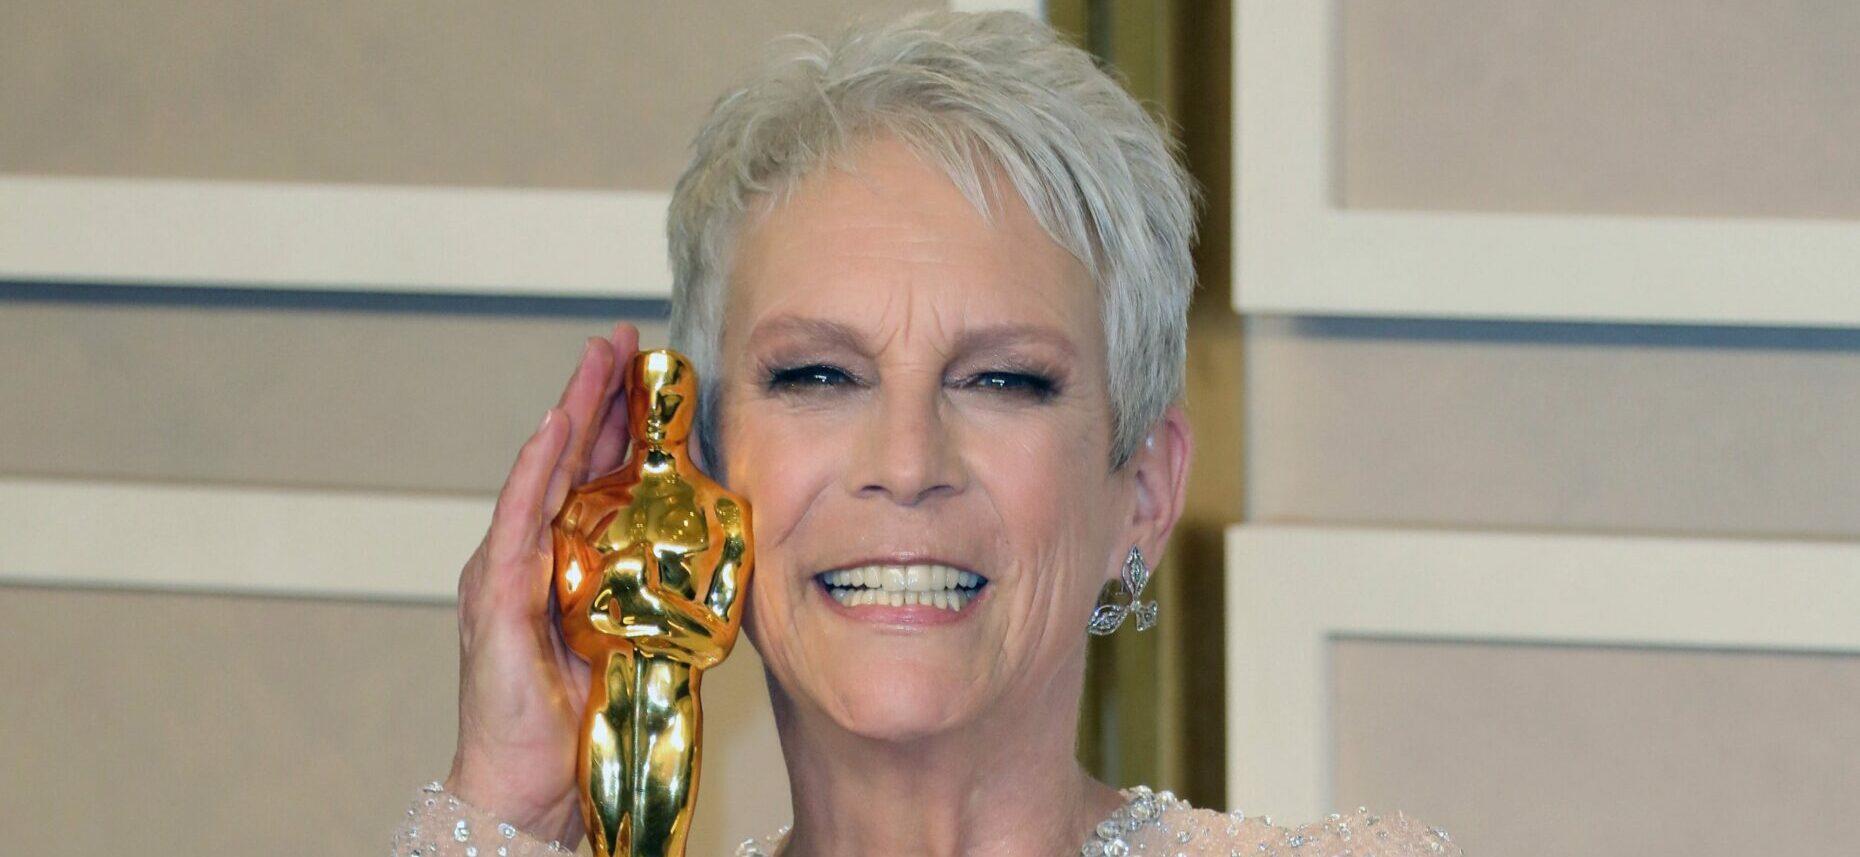 Jamie Lee Curtis Names Her Oscars Trophy ‘They/Them’ In ‘Support’ Of Transgender Daughter Ruby